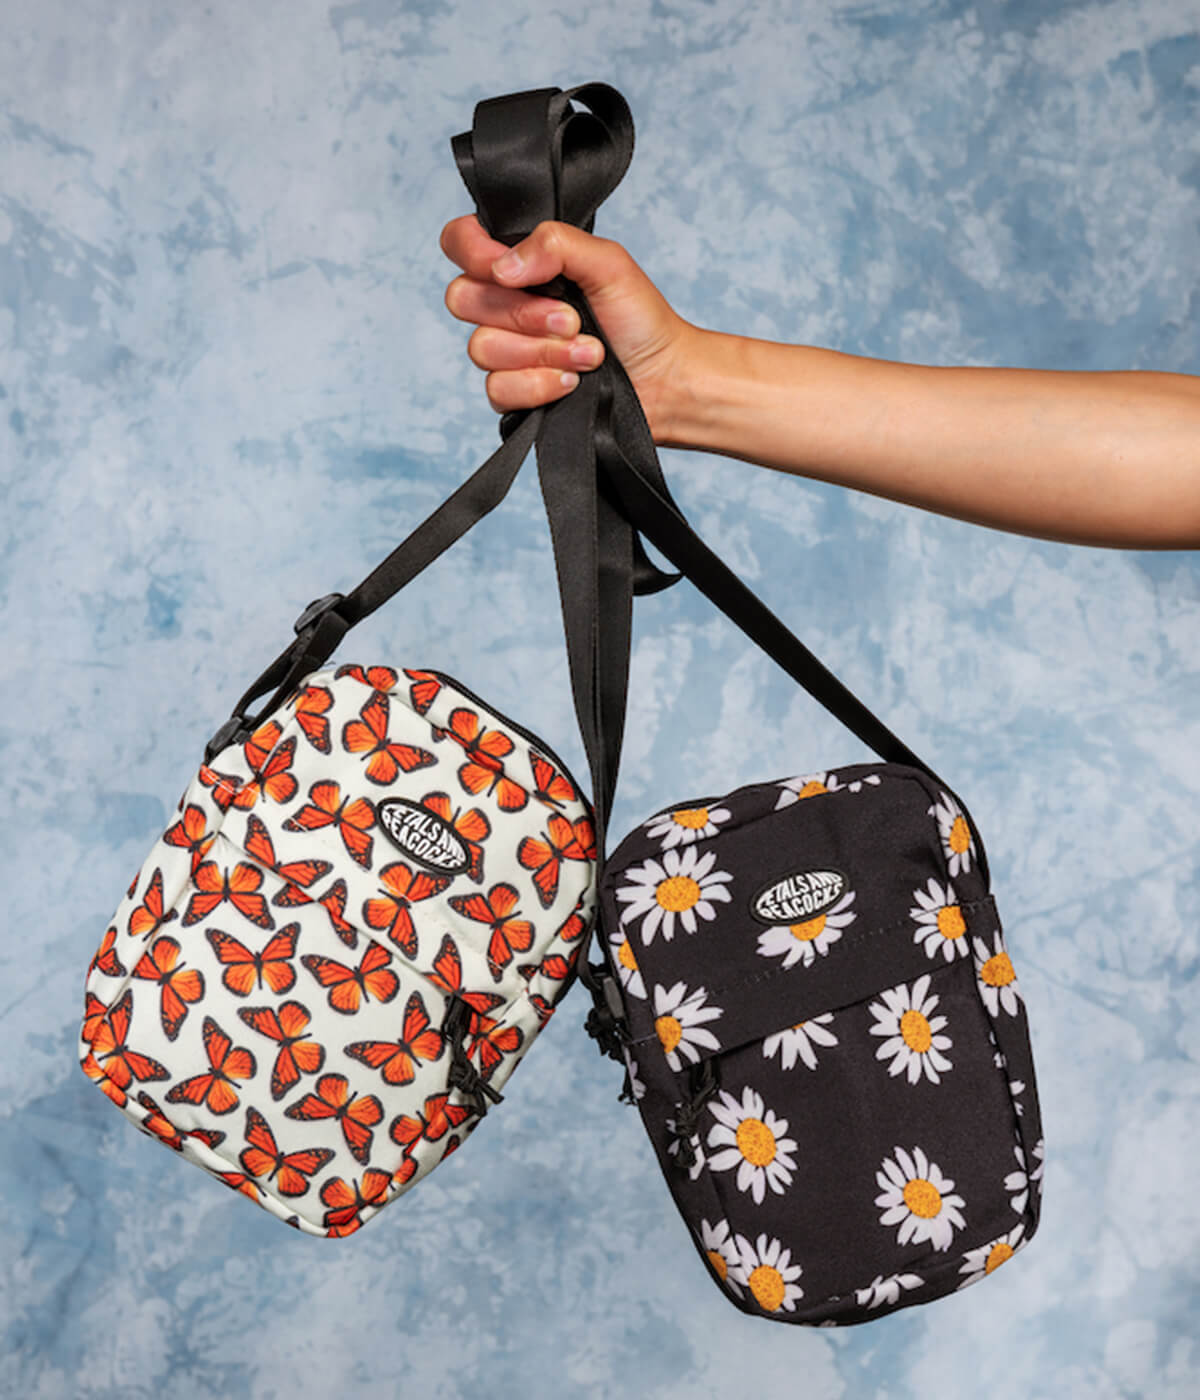 SLING BAGS AND FANNY PACKS - SHOP NOW